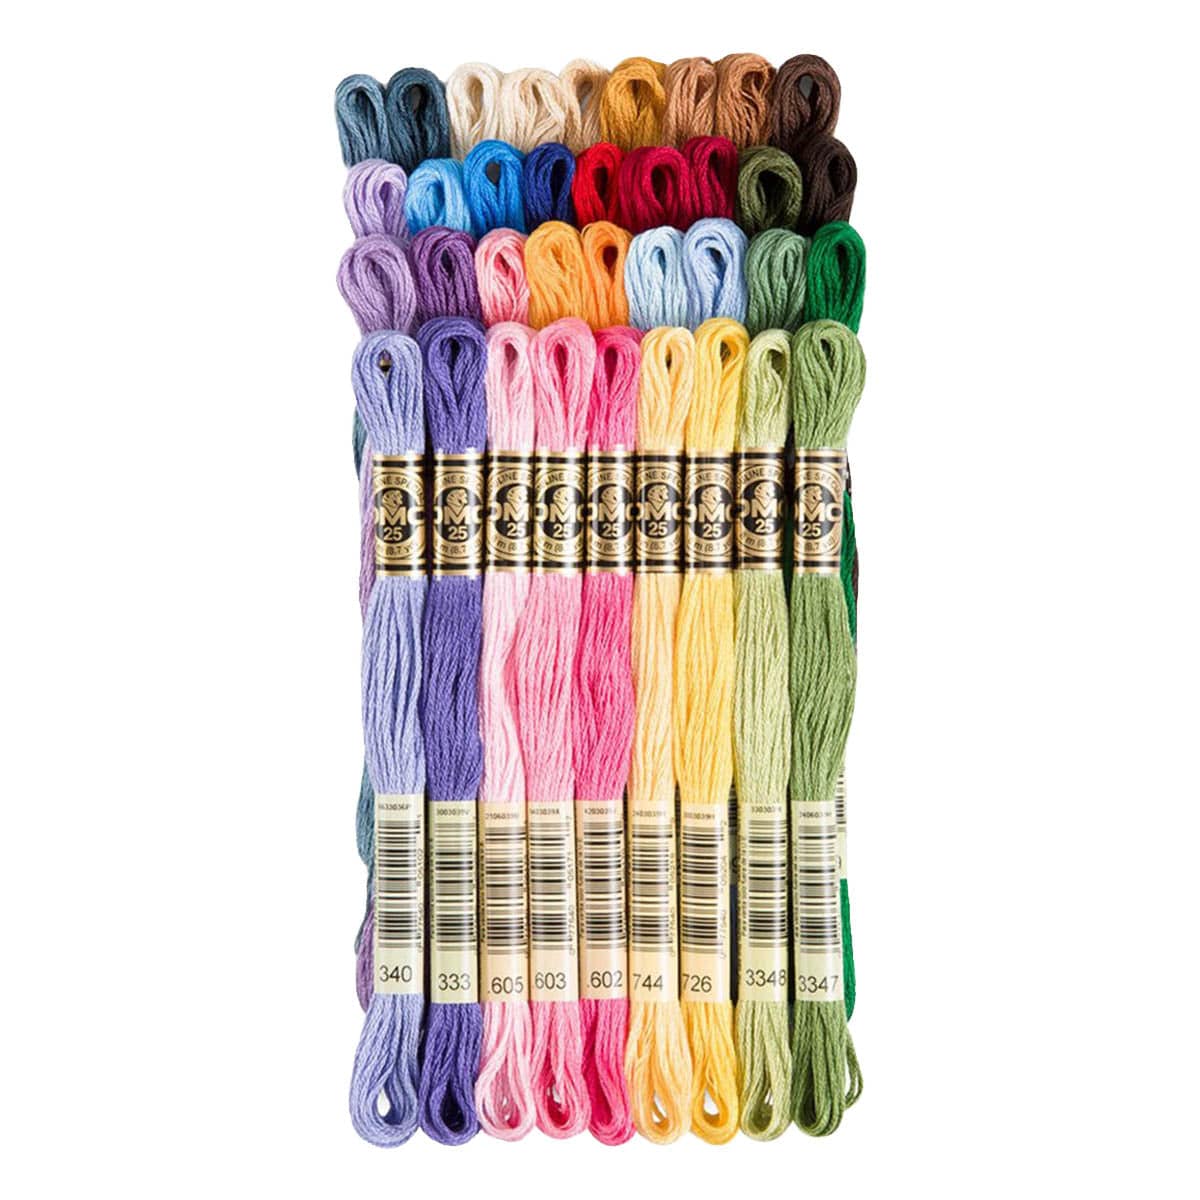 DMC Embroidery Floss Pack, Popular Colors, DMC Embroidery Thread, DMC Floss  Kit Include 36 Assorted Color Bundle with DMC Mouline Cotton White/Black